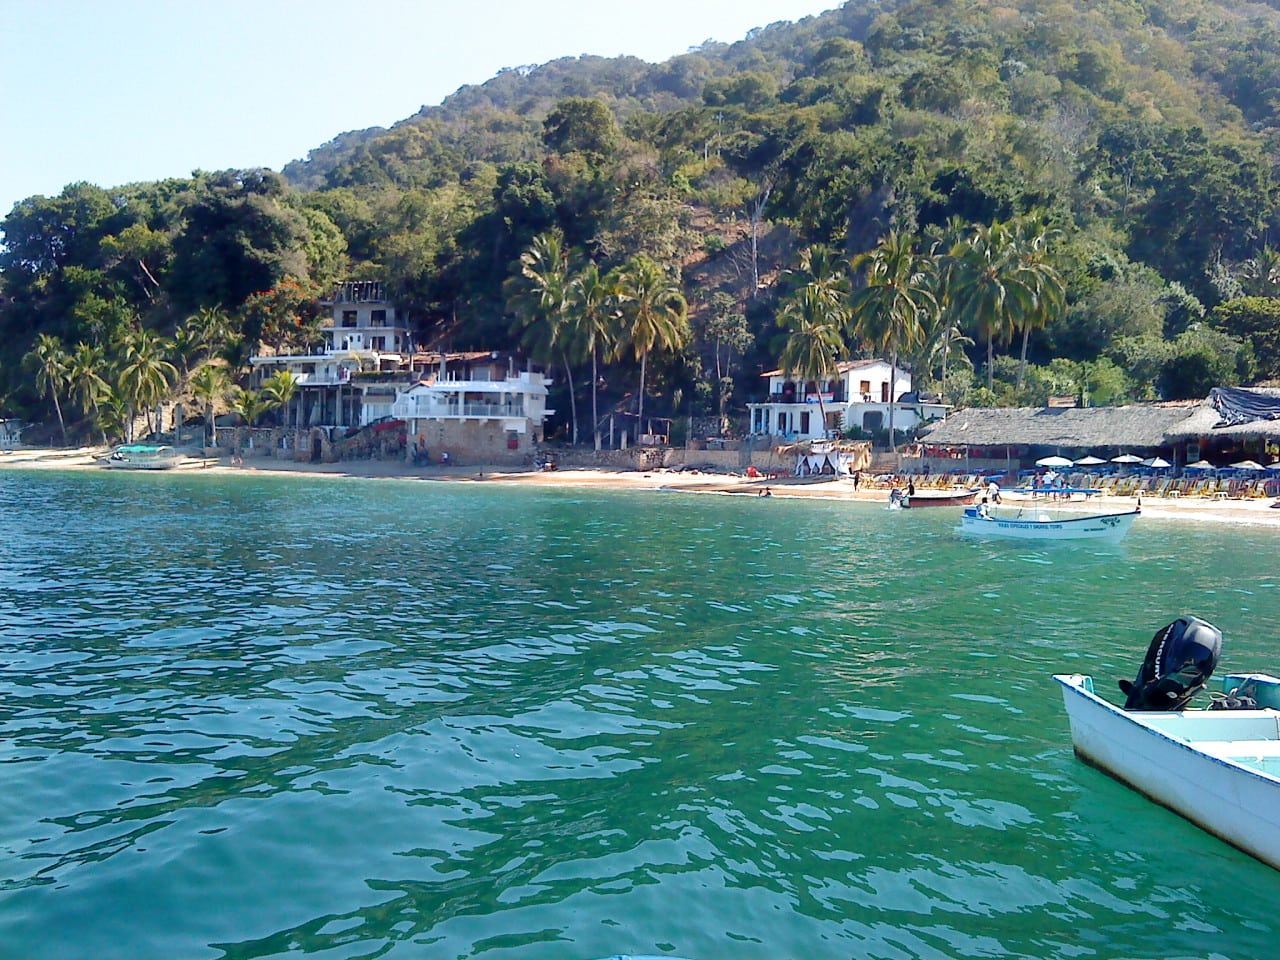 View of Las Animas beach from the water